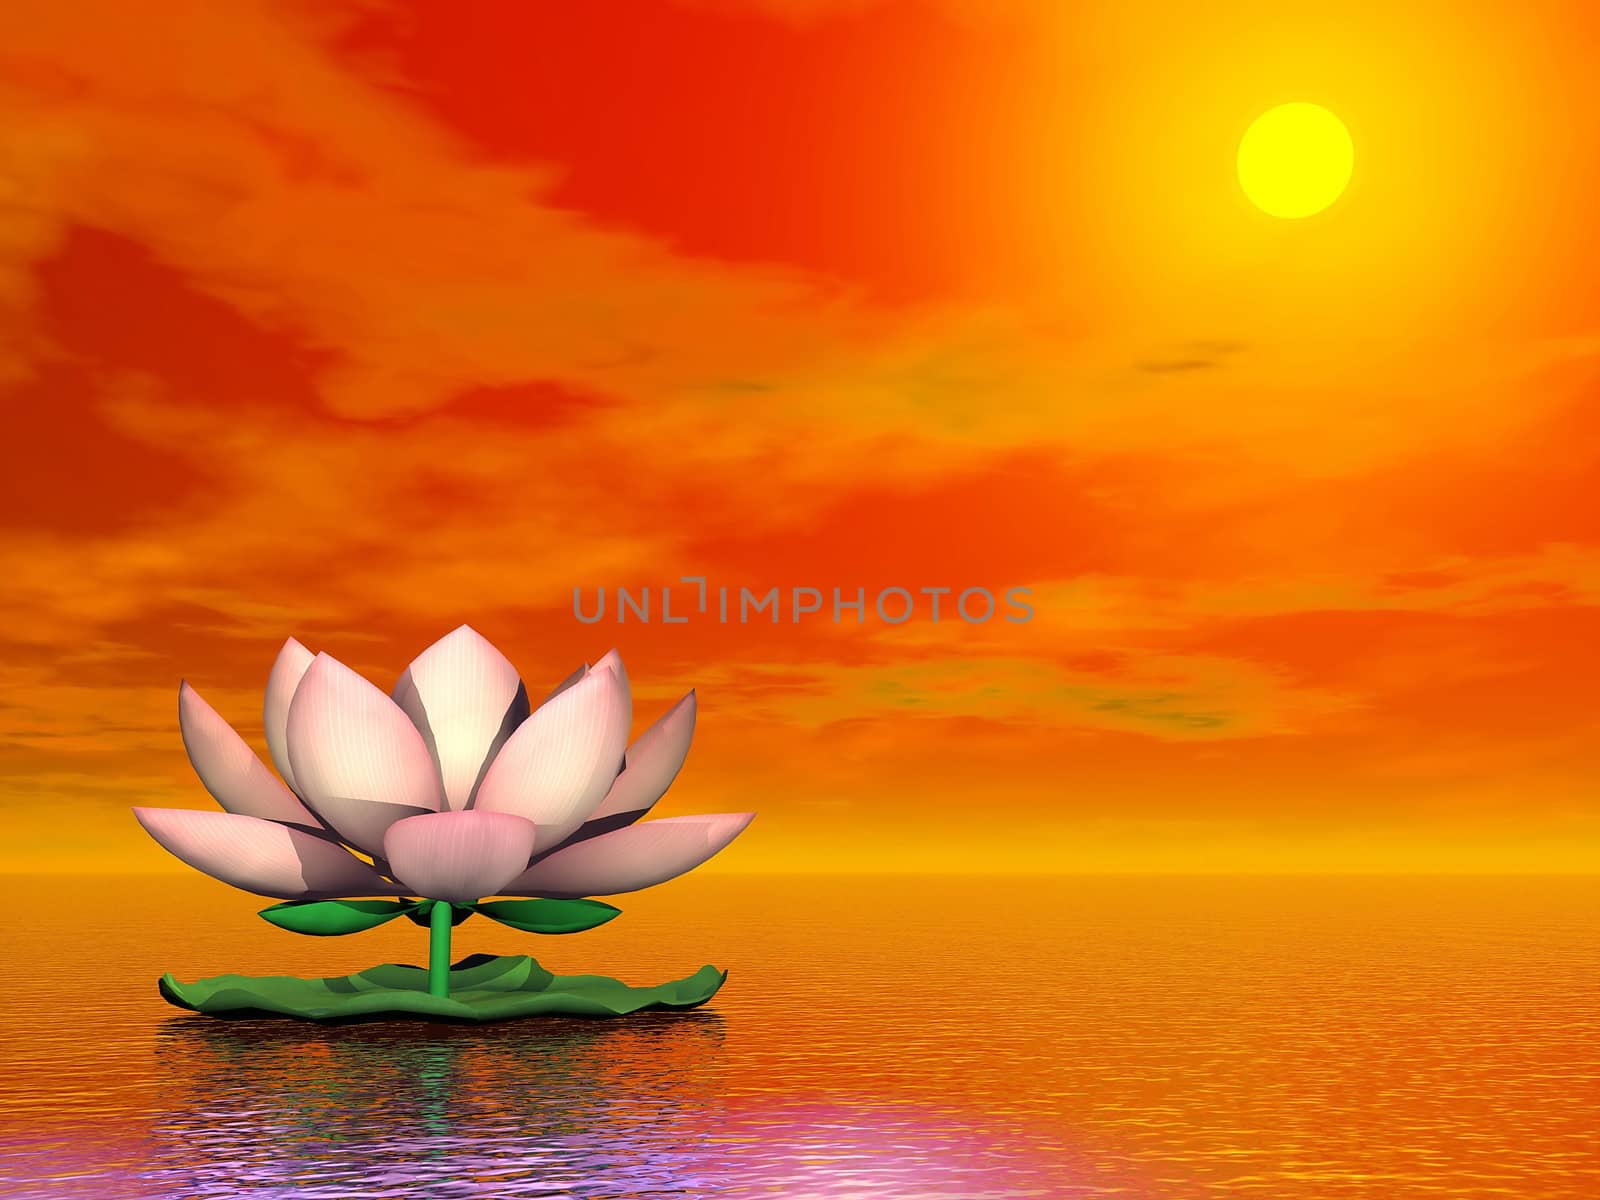 Lotus flower by sunset - 3D render by Elenaphotos21